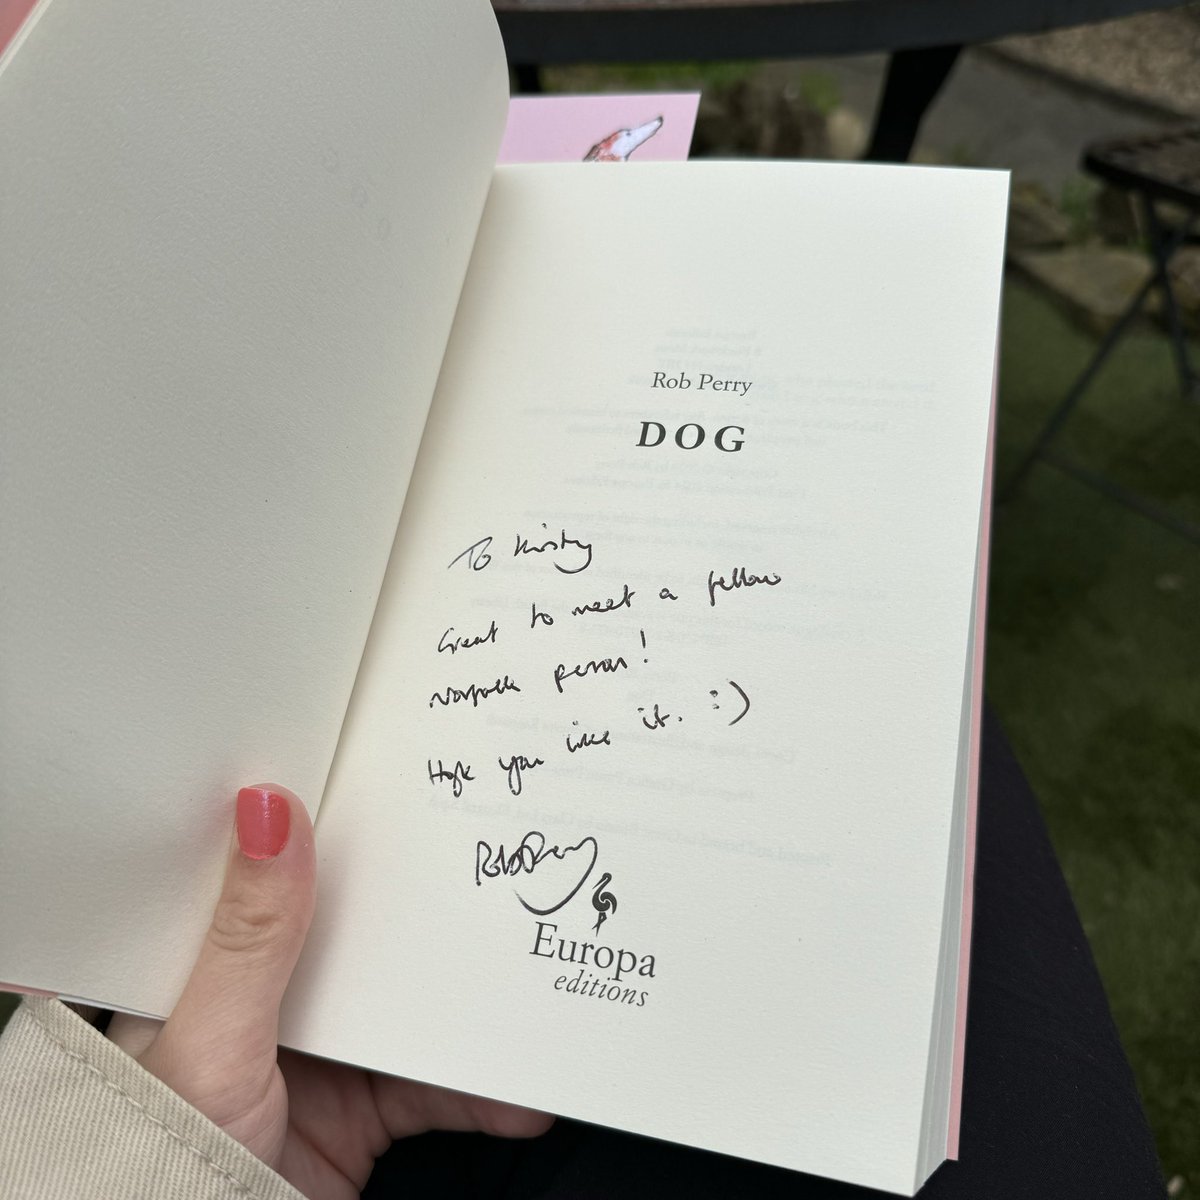 Can’t beat some bank holiday reading in the garden! It was great meeting Rob Perry at the launch of Dog at @SheffLibraries last week, and to discover he’s also from Norfolk! Great debut 📖💘